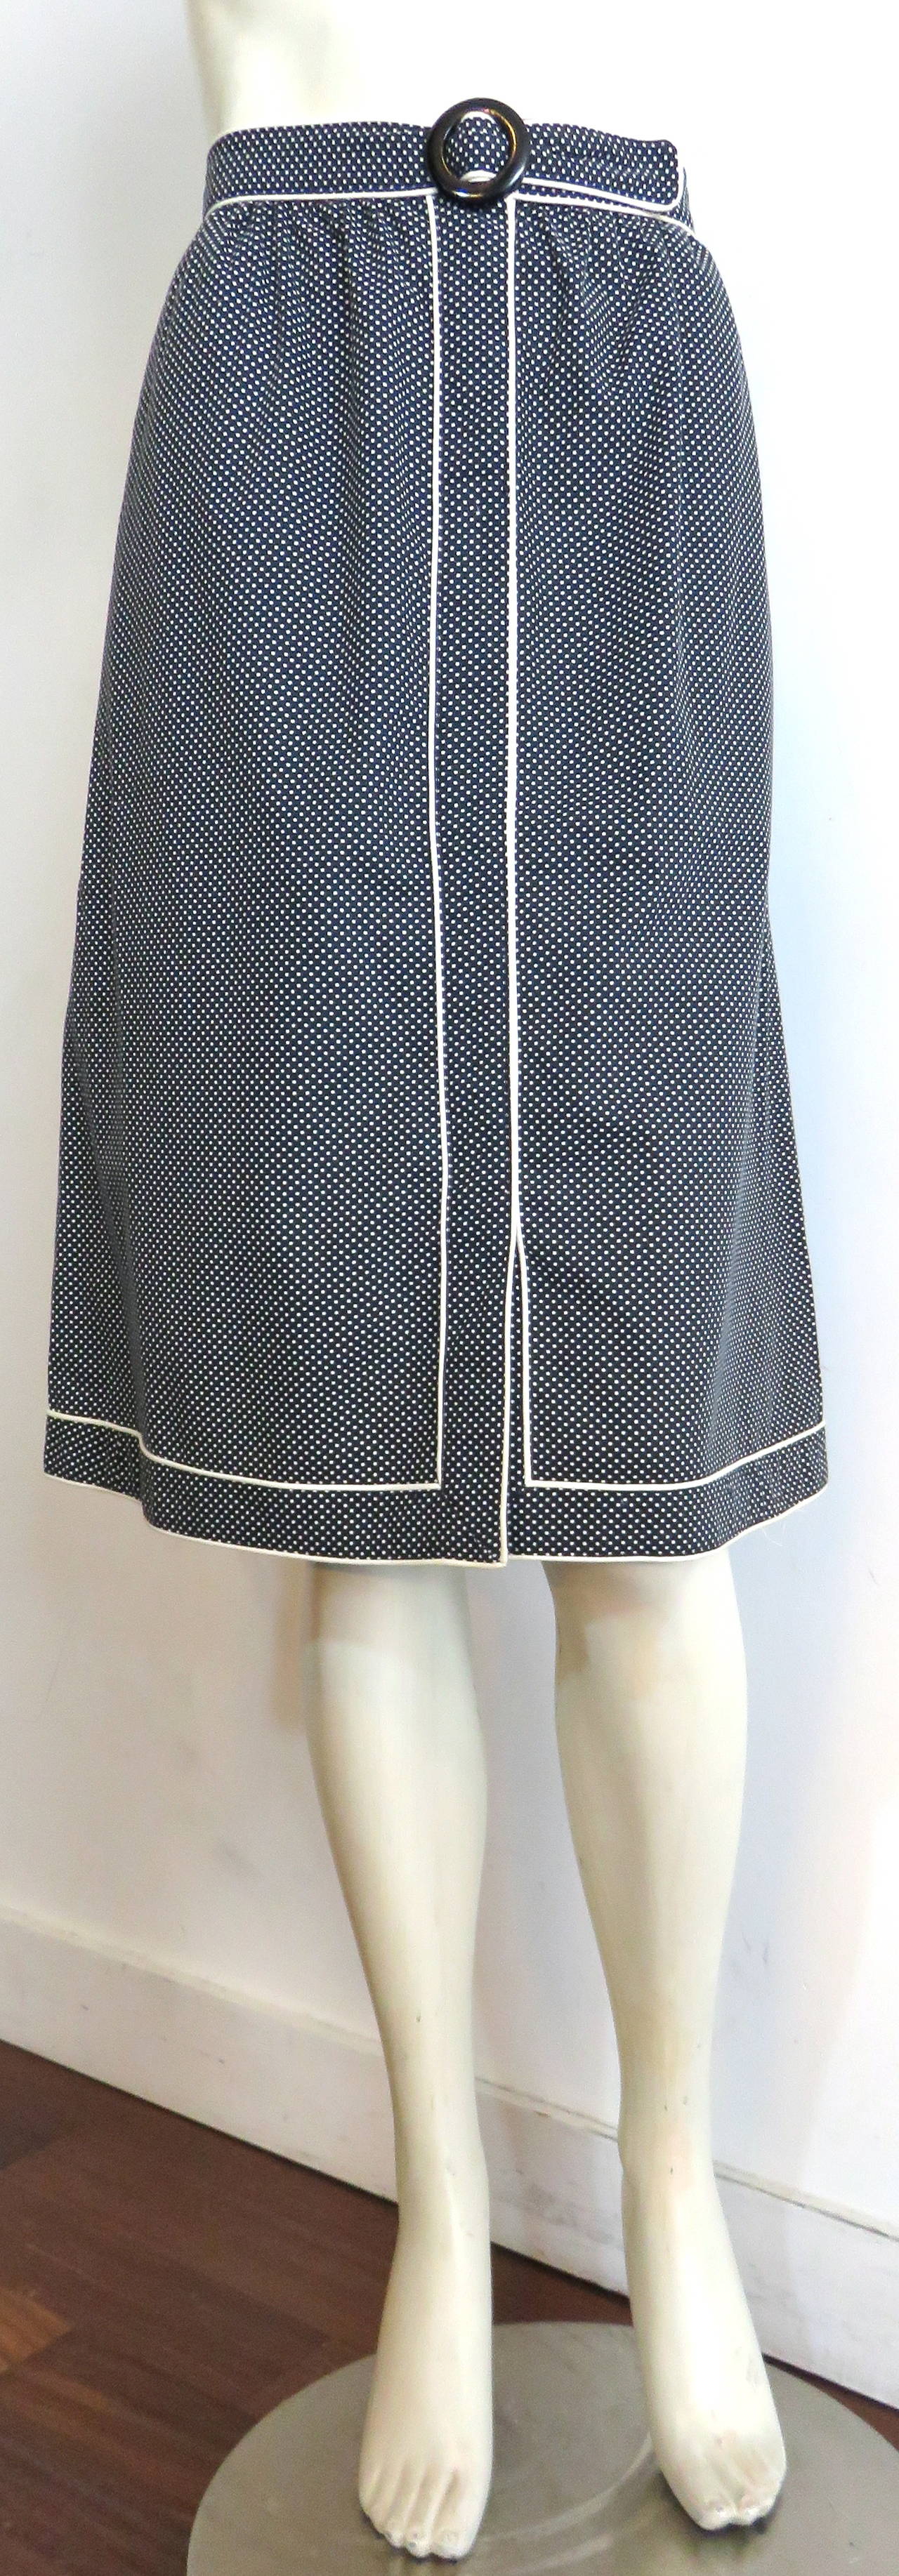 Black 1980's VALENTINO Dotted skirt For Sale